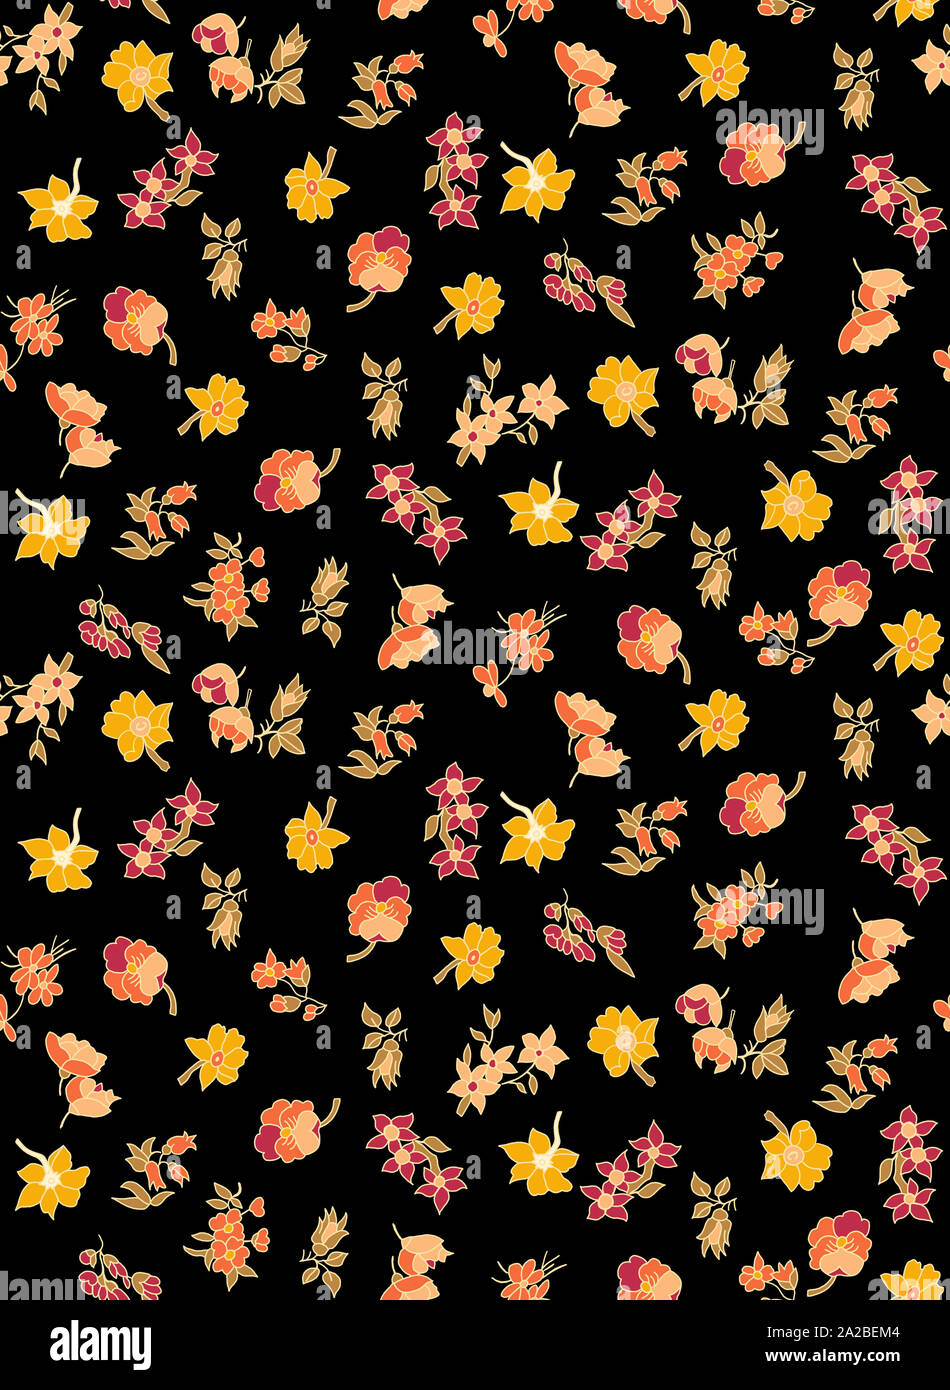 Seamless floraled pattern with yellow color on black background for textile or fabric prints.. Stock Photo